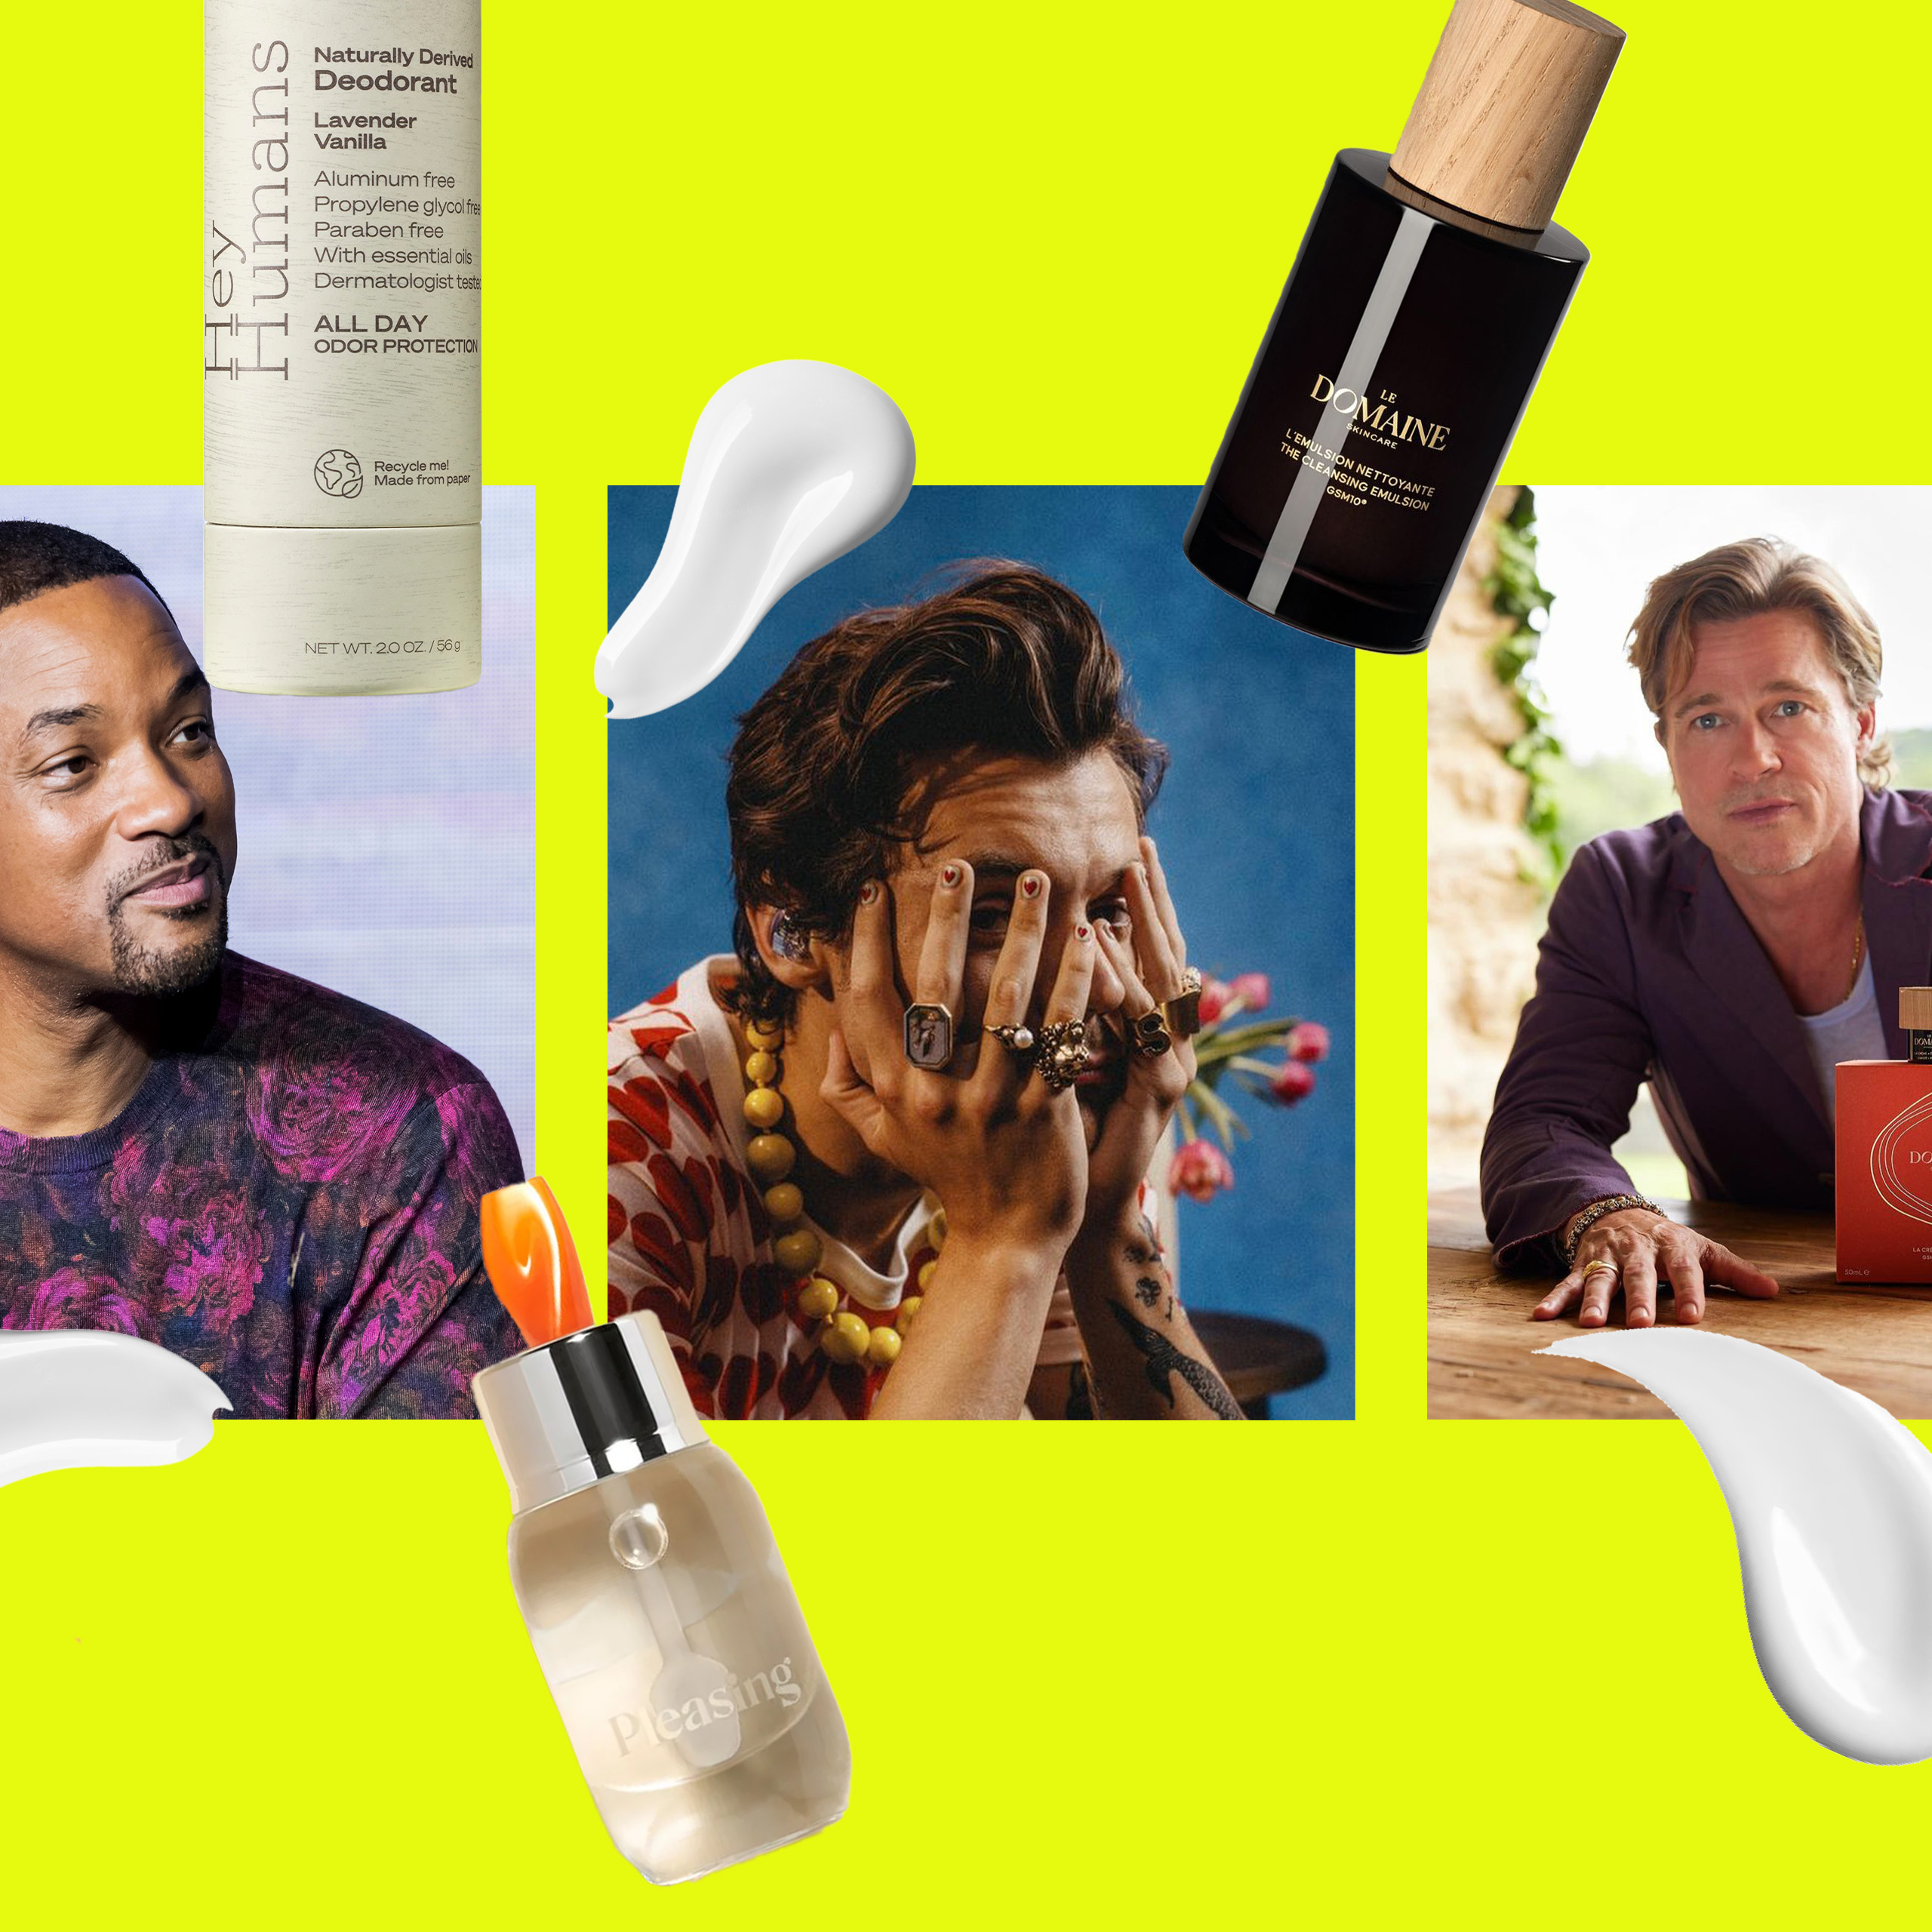 Male Celebrities in the World of Skincare and Beauty